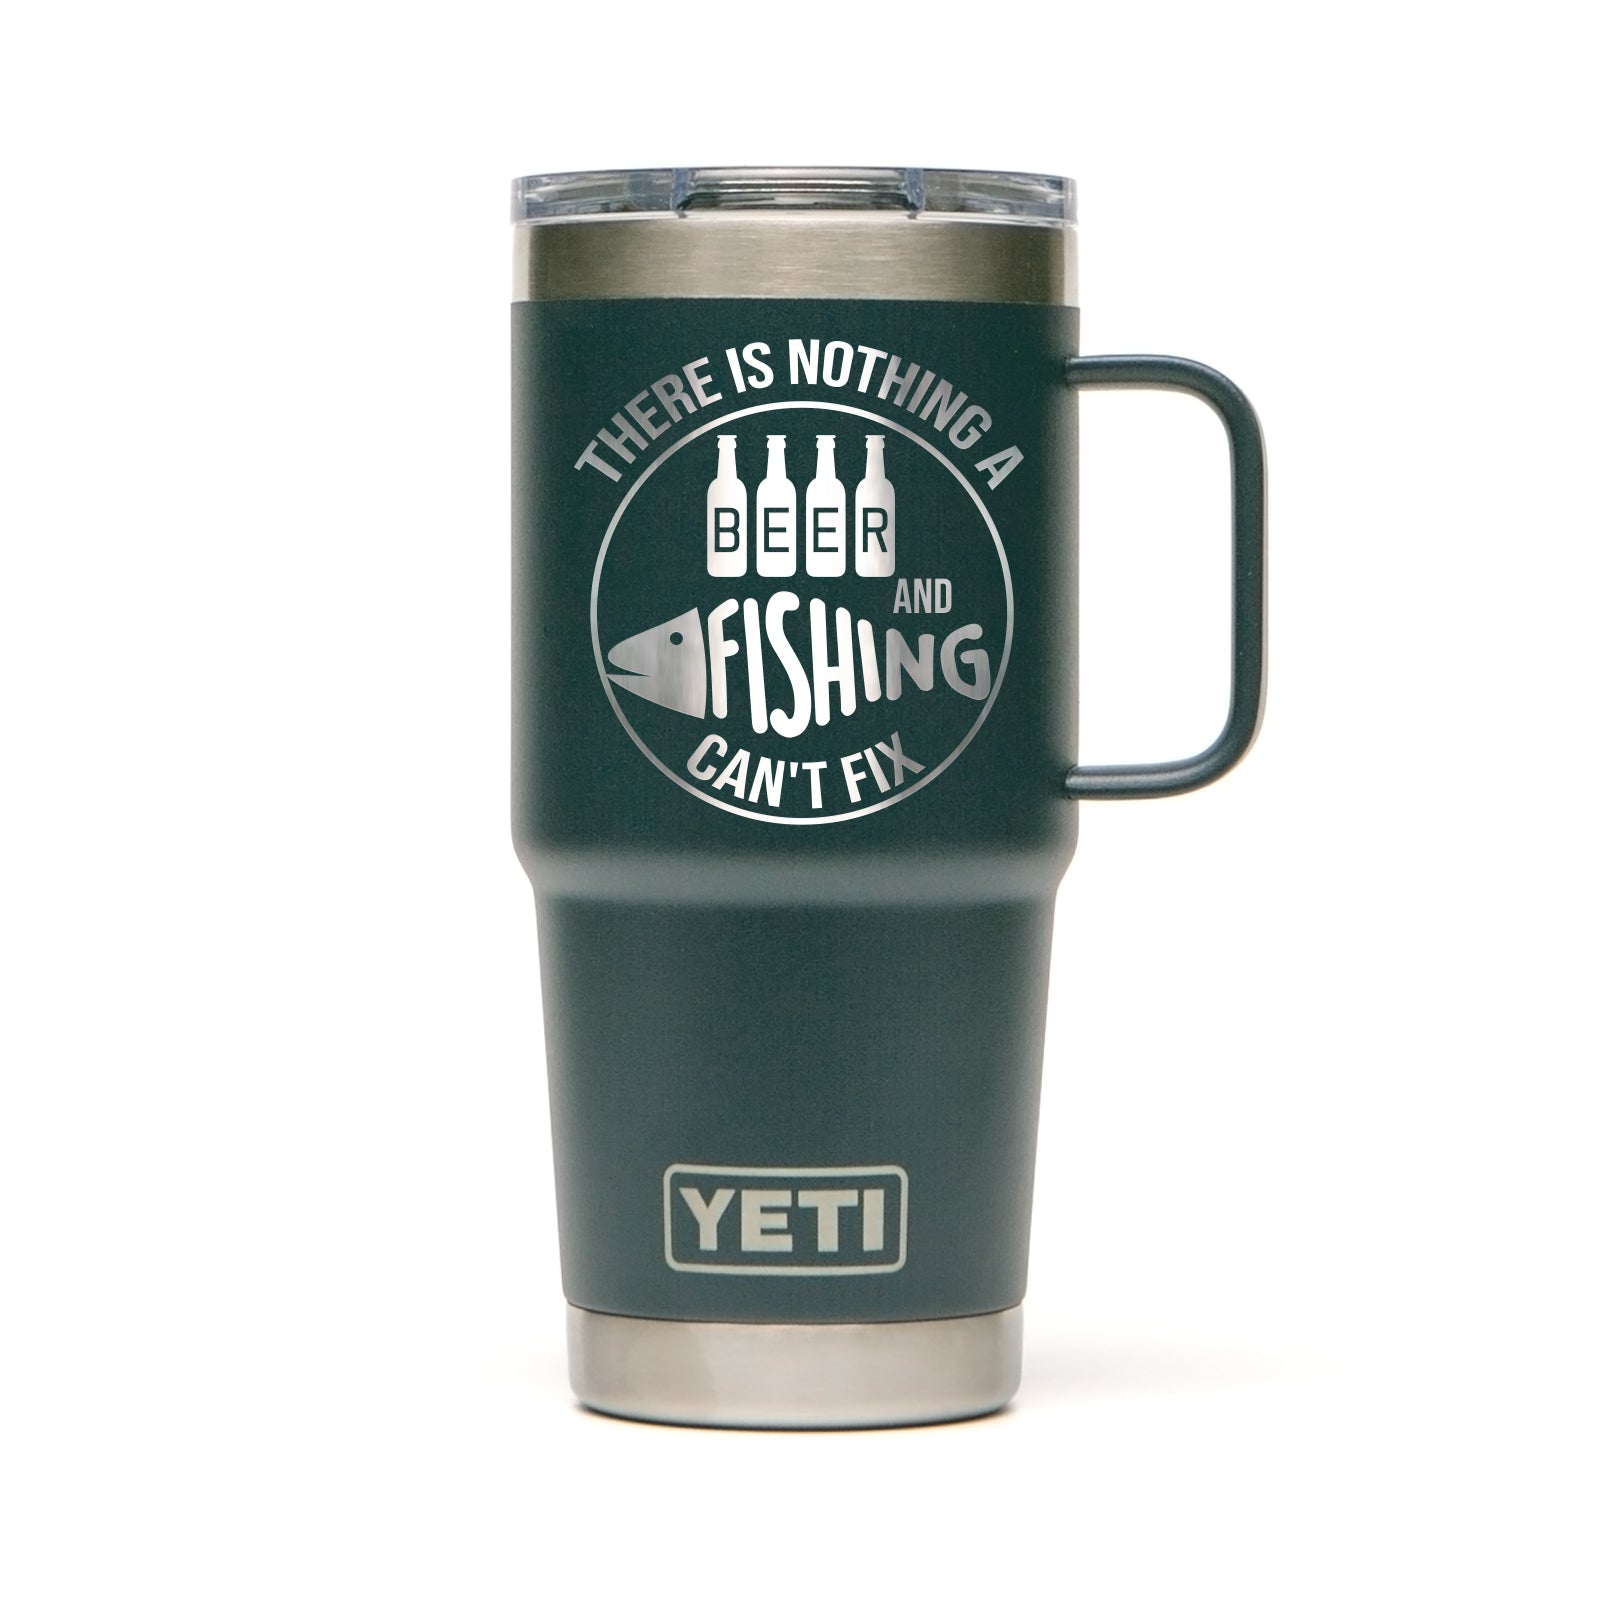 Yeti's Top-Selling Rambler Mug Shoppers Call an 'Indispensable Companion'  Is Quietly on Sale, Thestreet